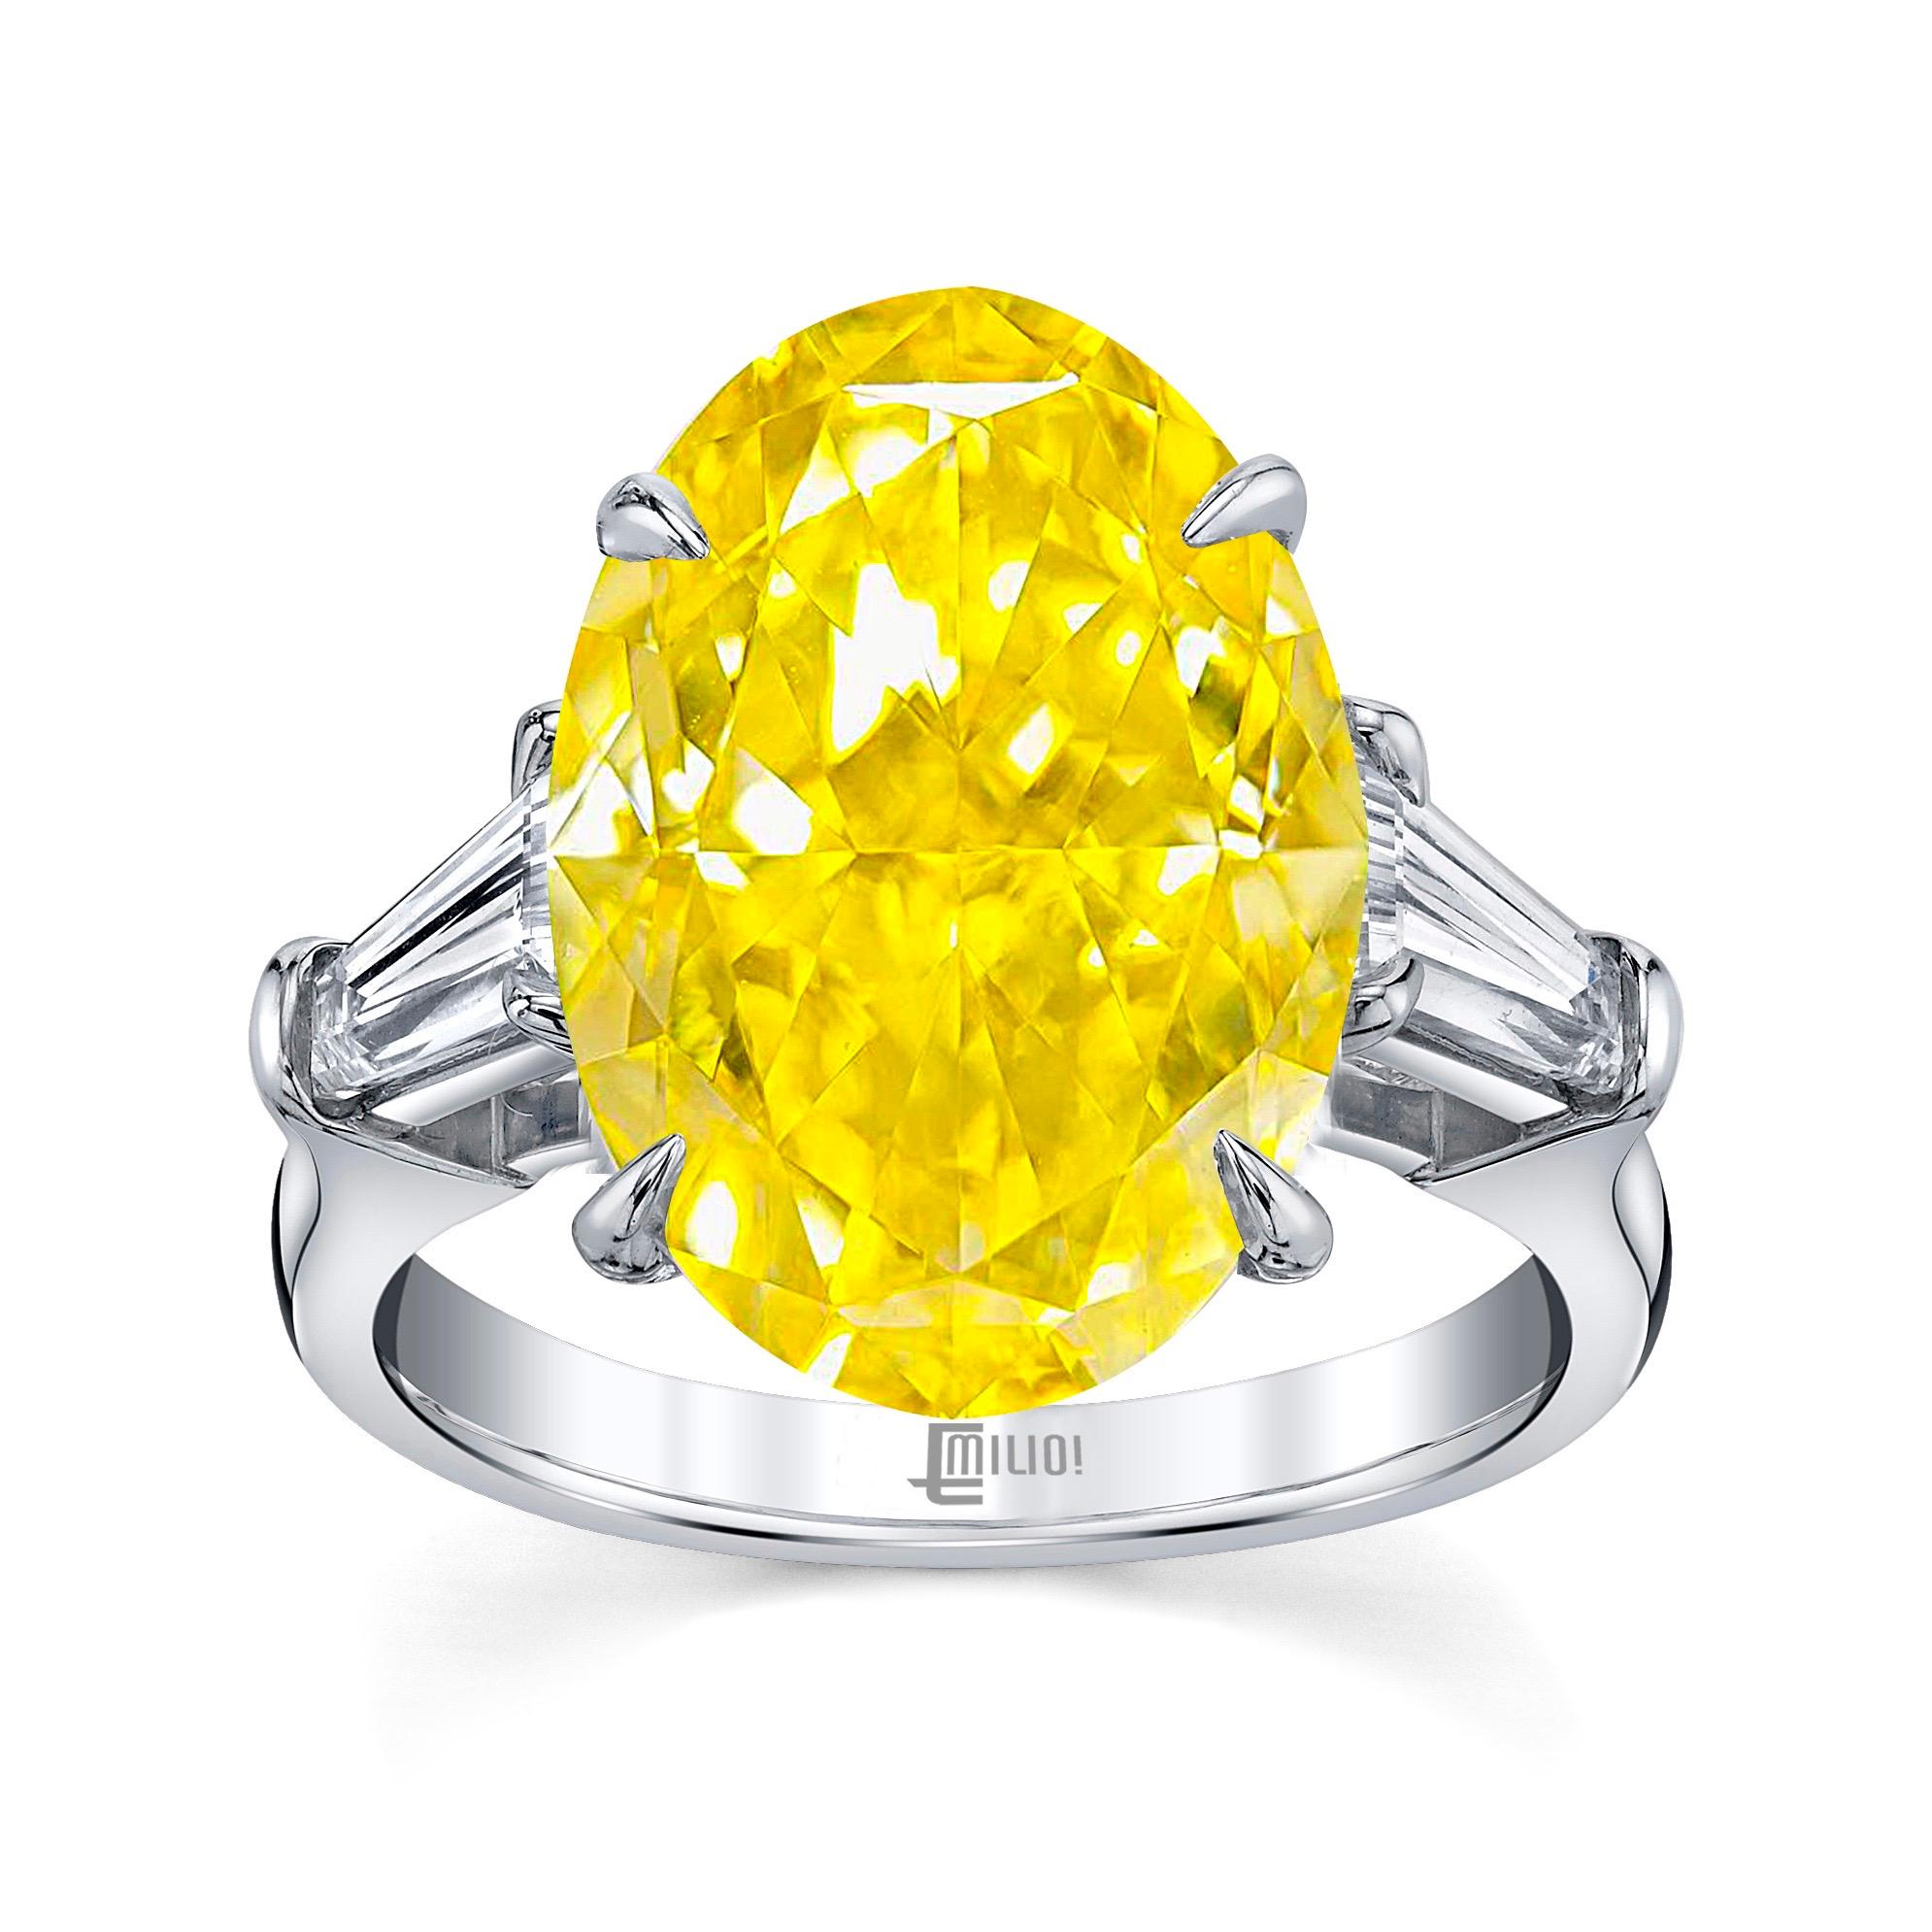 From the Museum vault at Emilio Jewelry, Located On New York’s Iconic Fifth Avenue:
Showcasing a magnificent center diamond. A Gia certified Vivid yellow oval diamond with no overtone. Vivid is the best color saturation grading possible, so this is